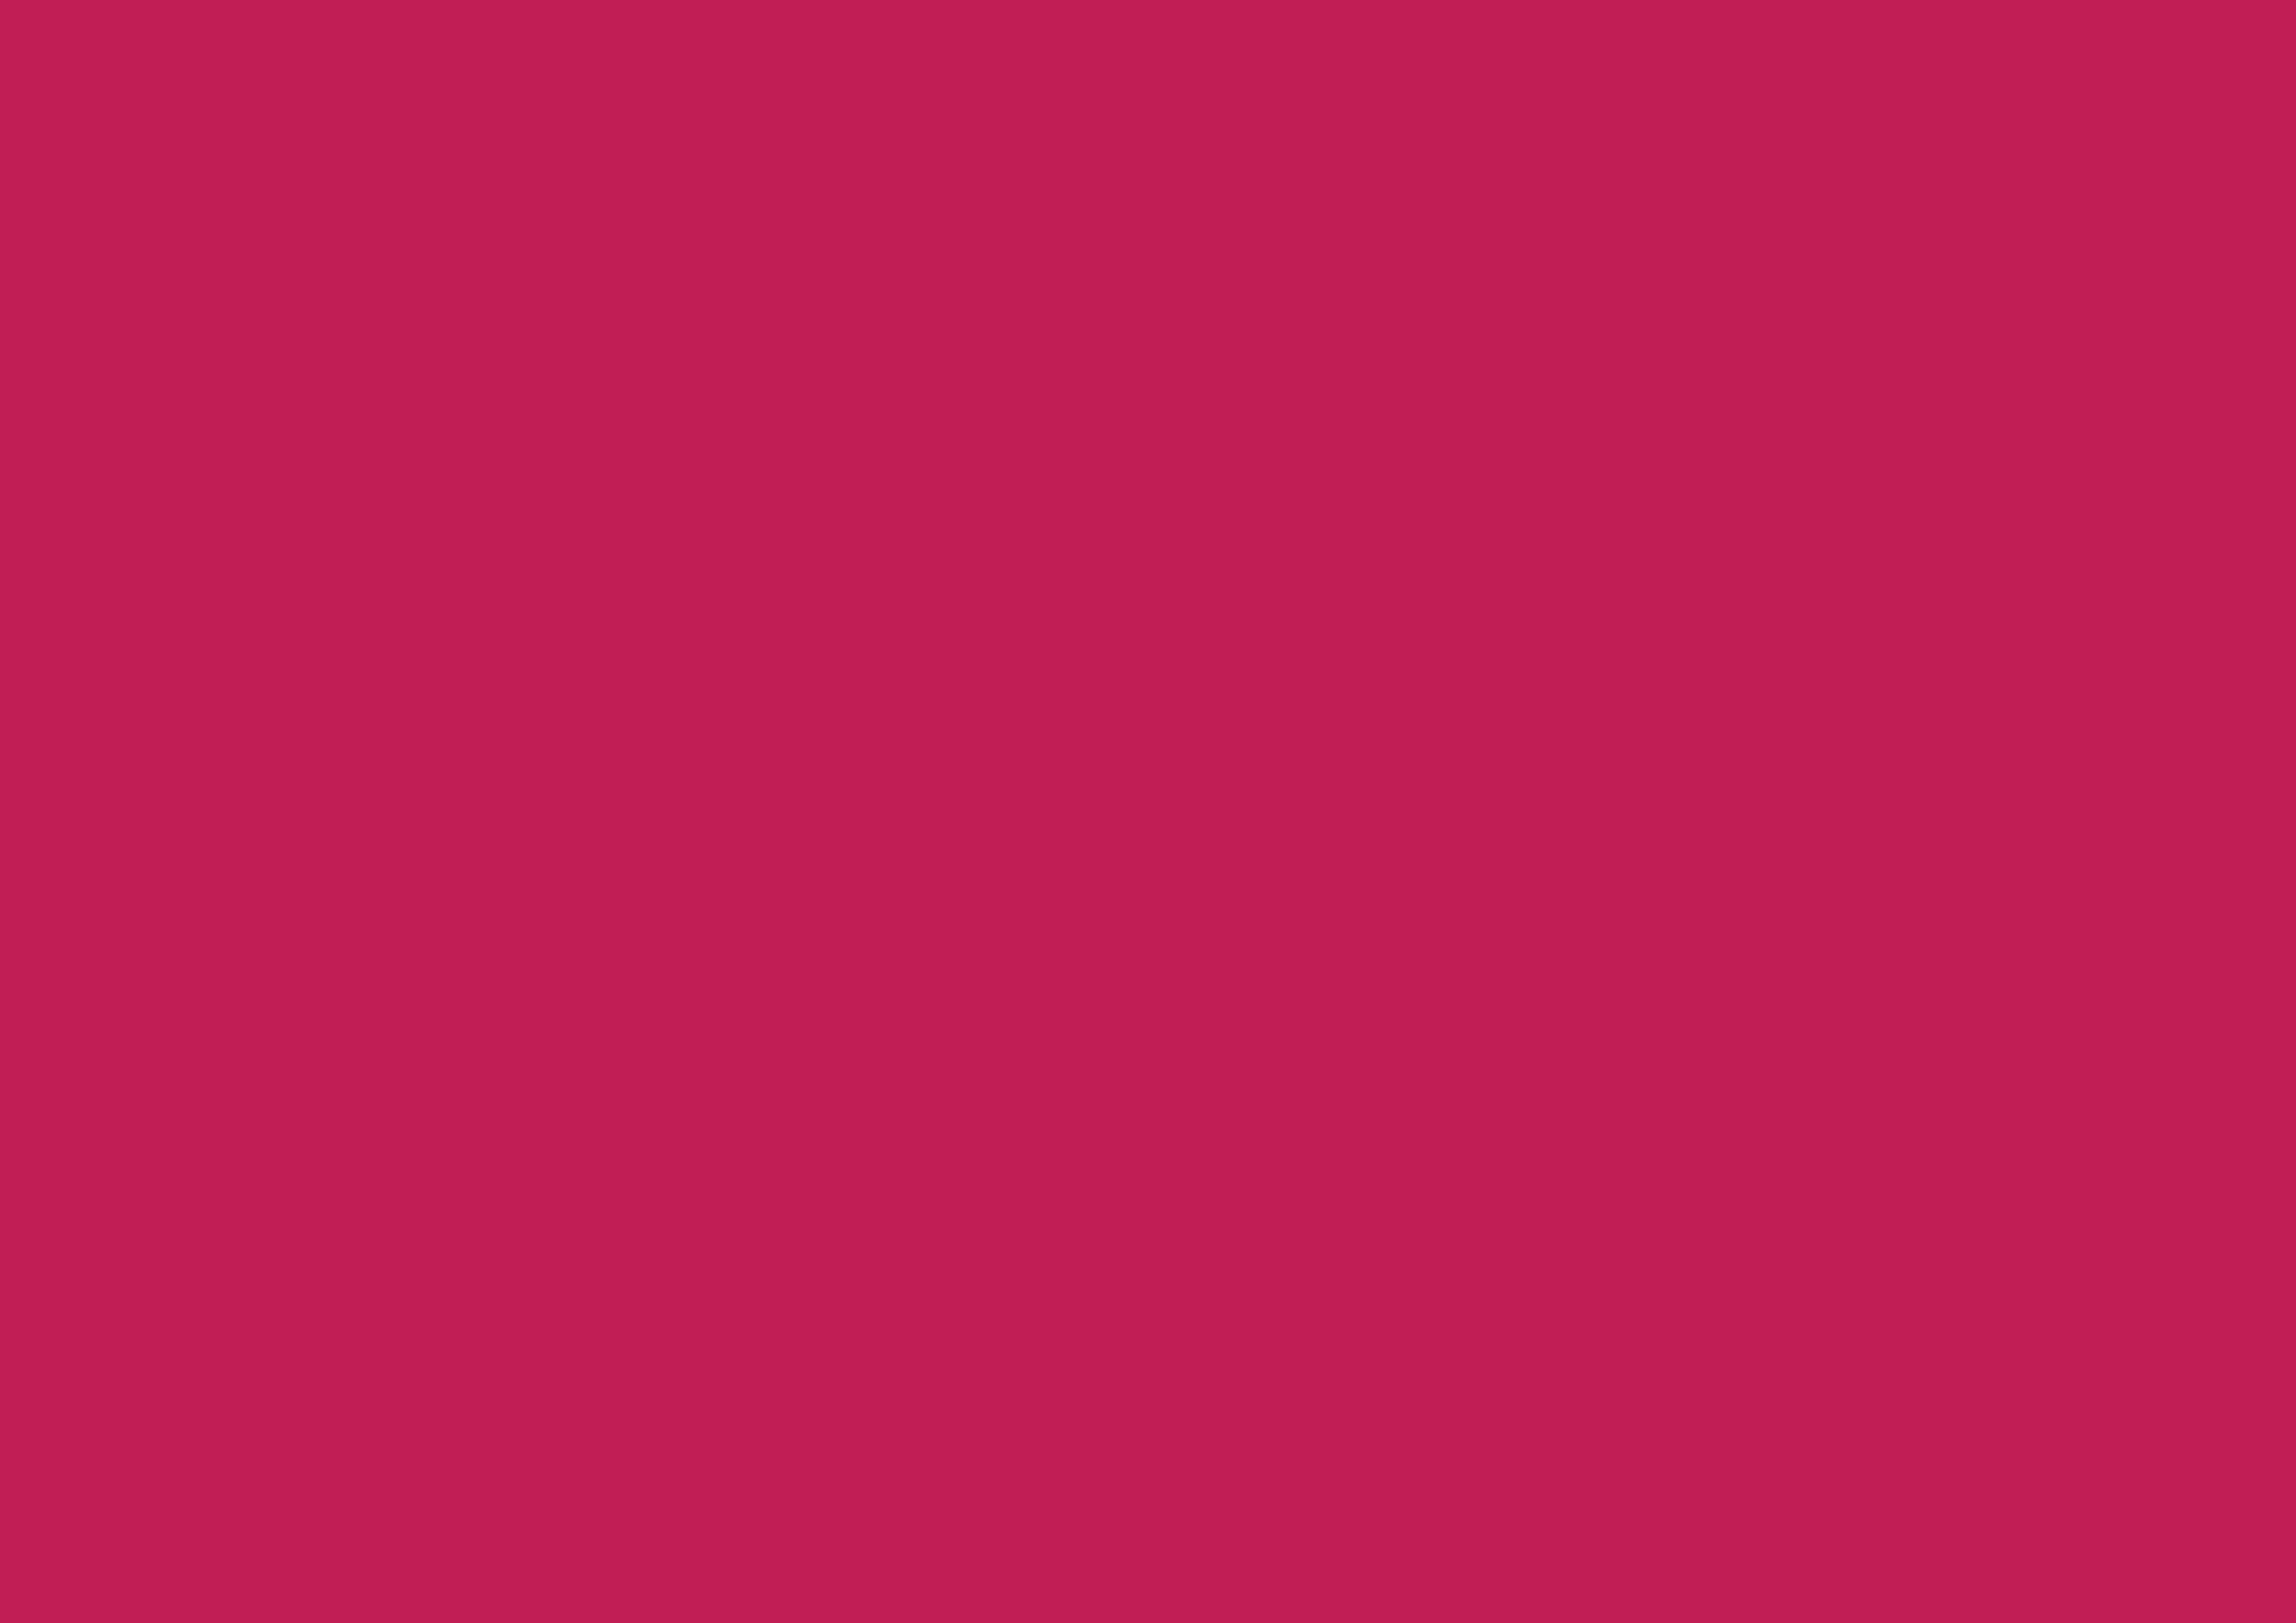 3508x2480 Rose Red Solid Color Background